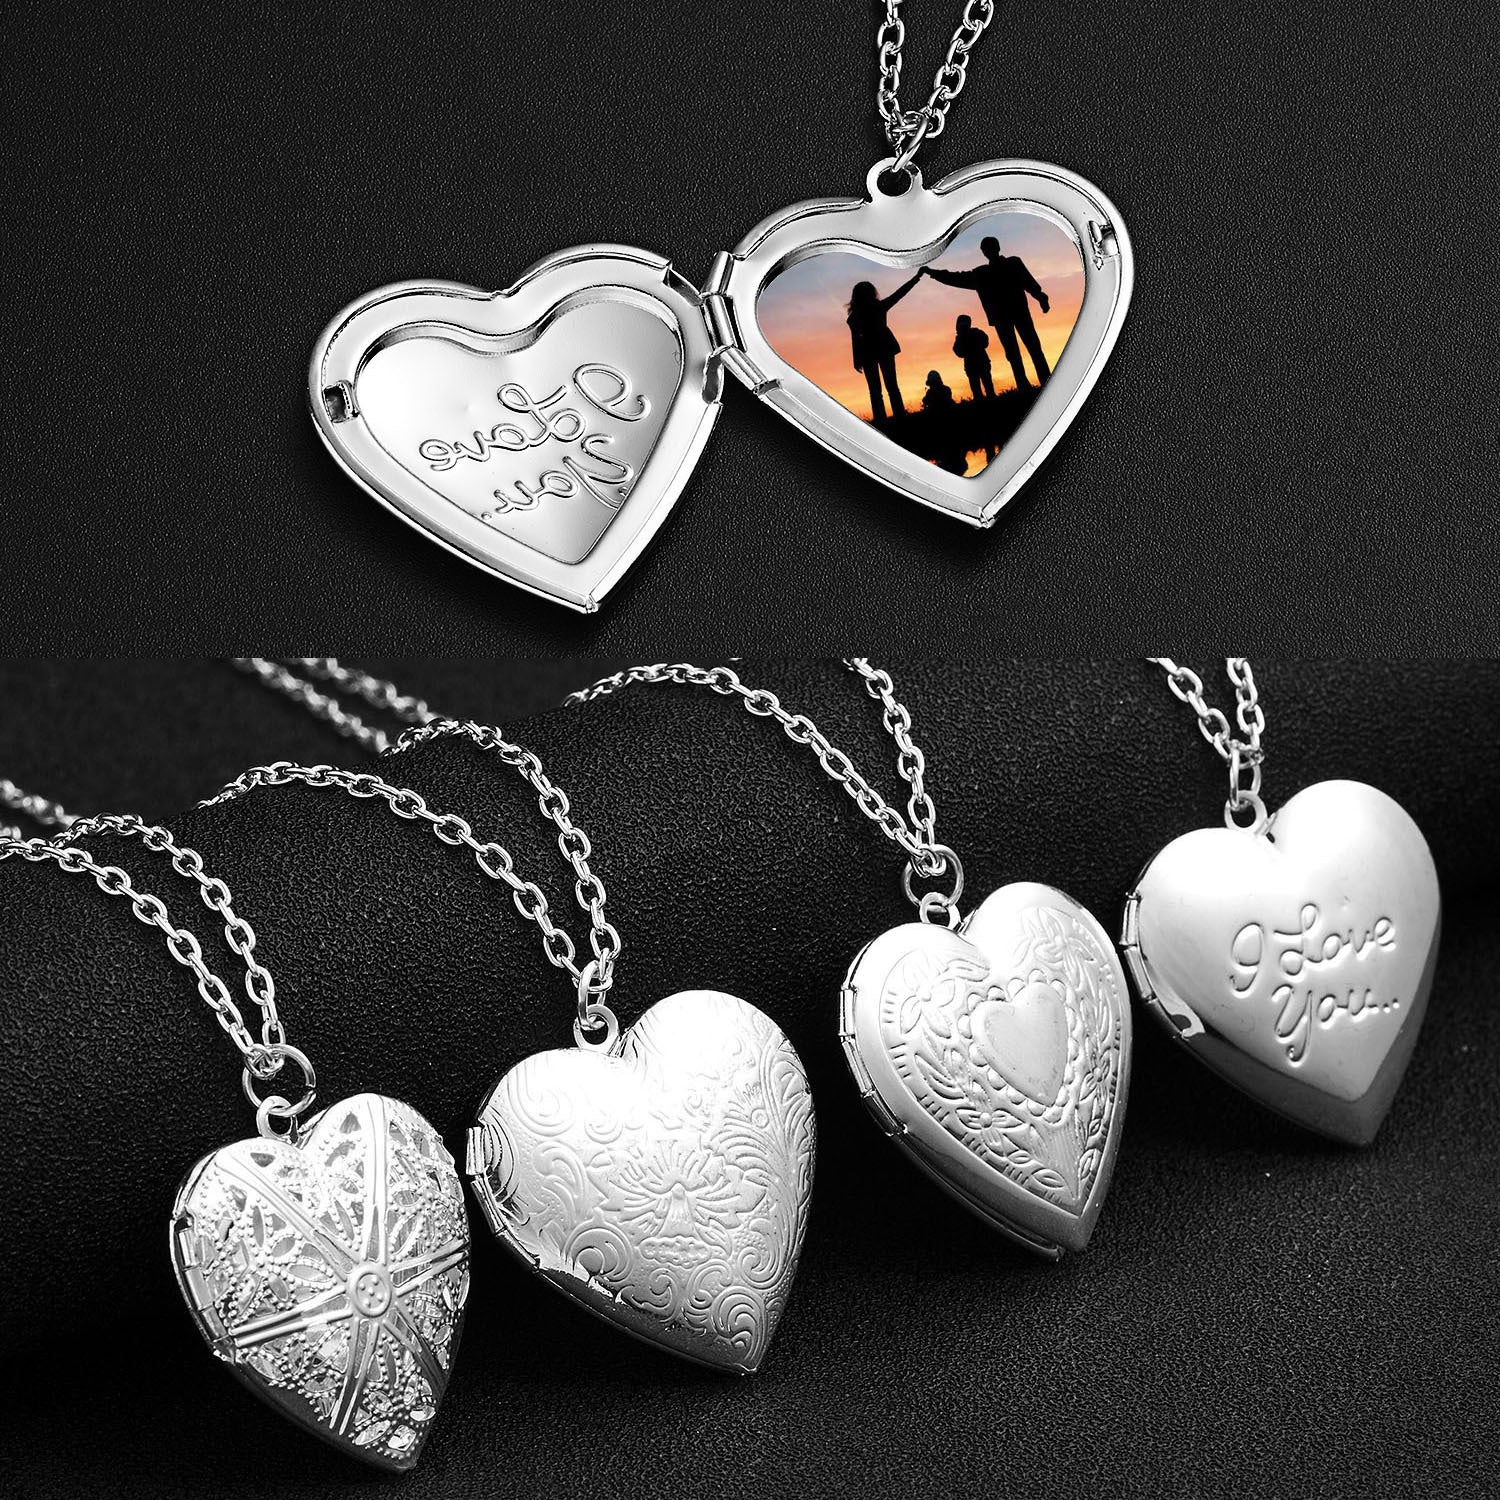 Carved Design Love Necklace - Personalized Heart-shaped Photo Frame Pendant Necklace